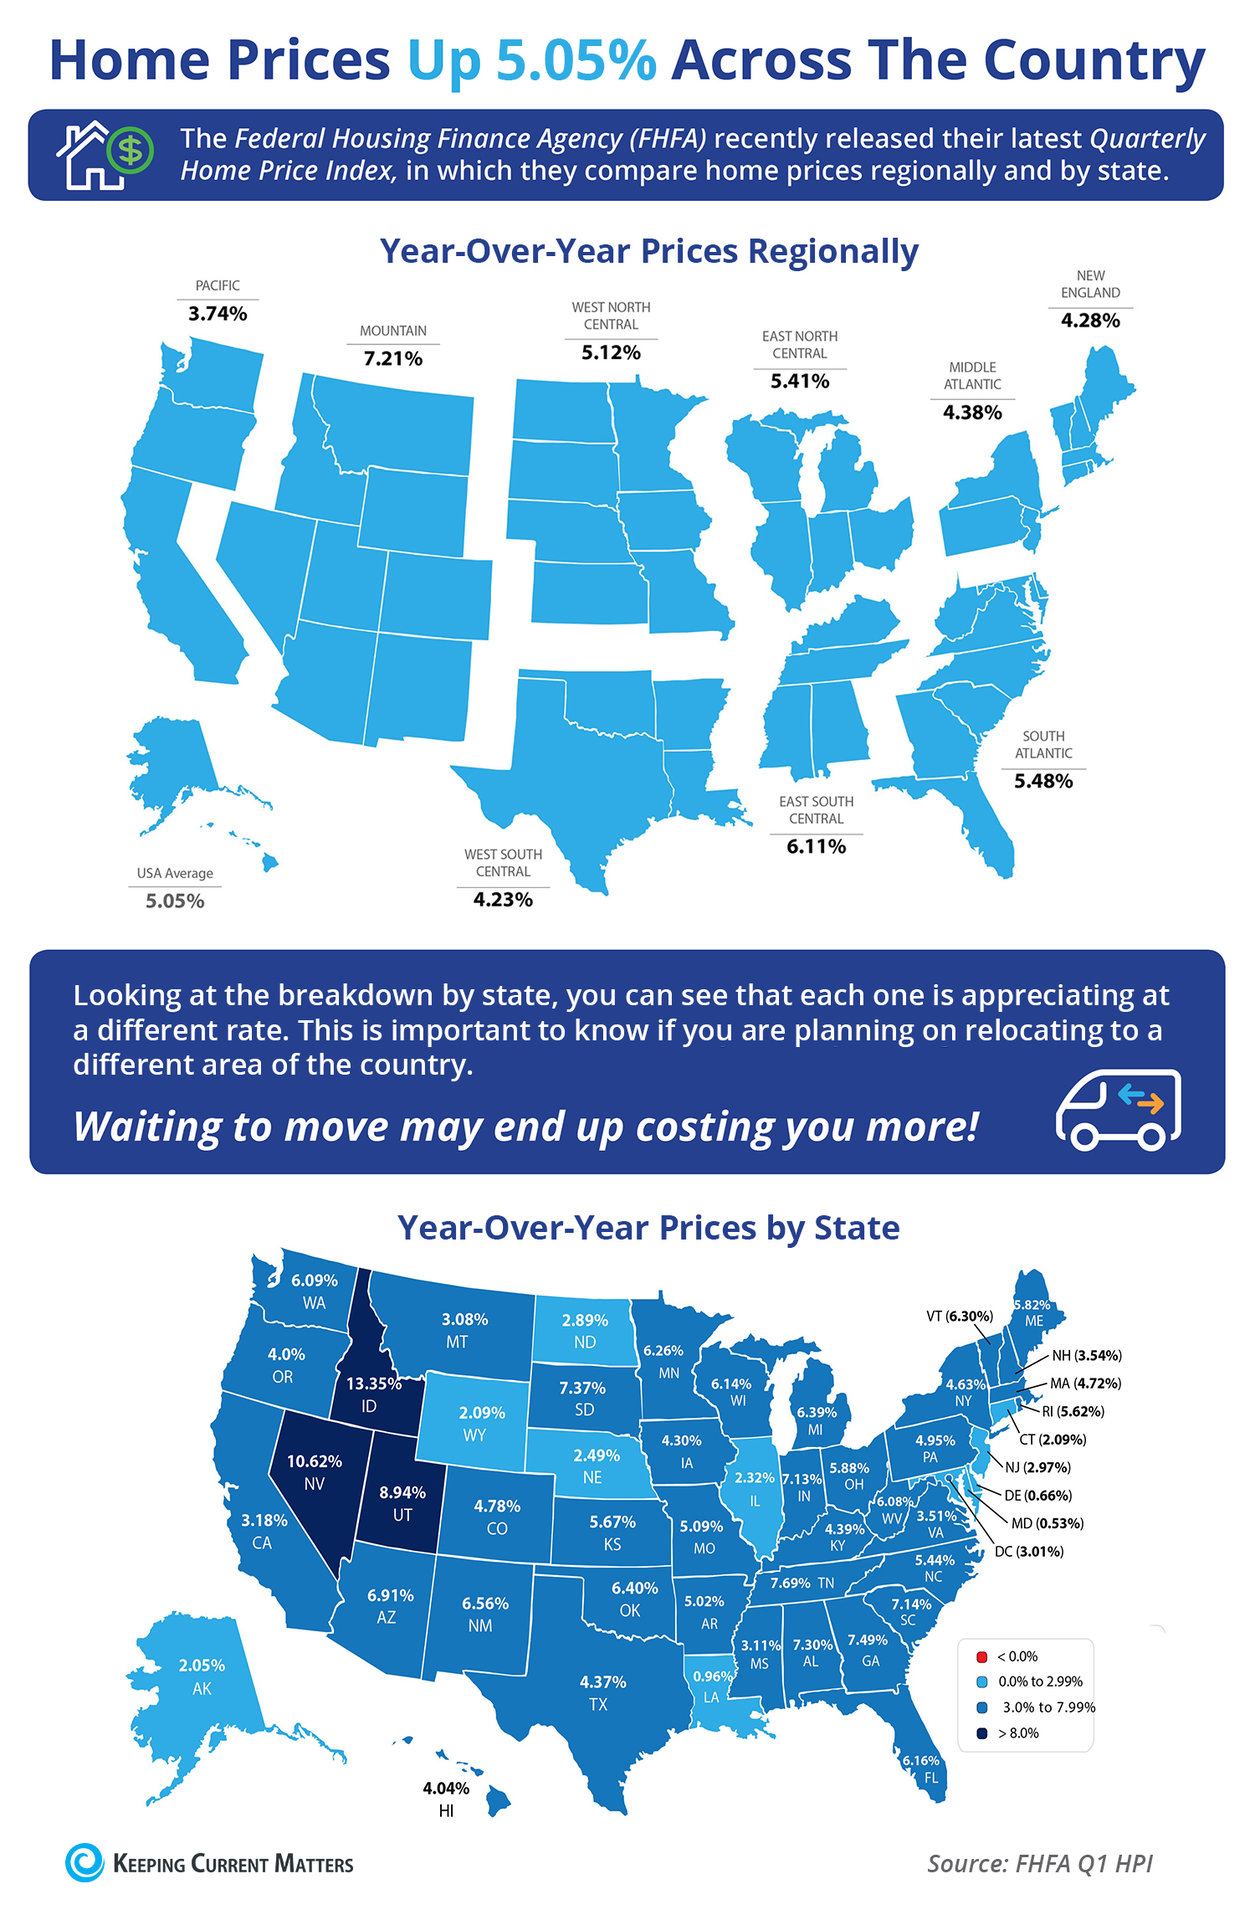 Home Prices Up 5.05% Across the Country [INFOGRAPHIC] | Keeping Current Matters